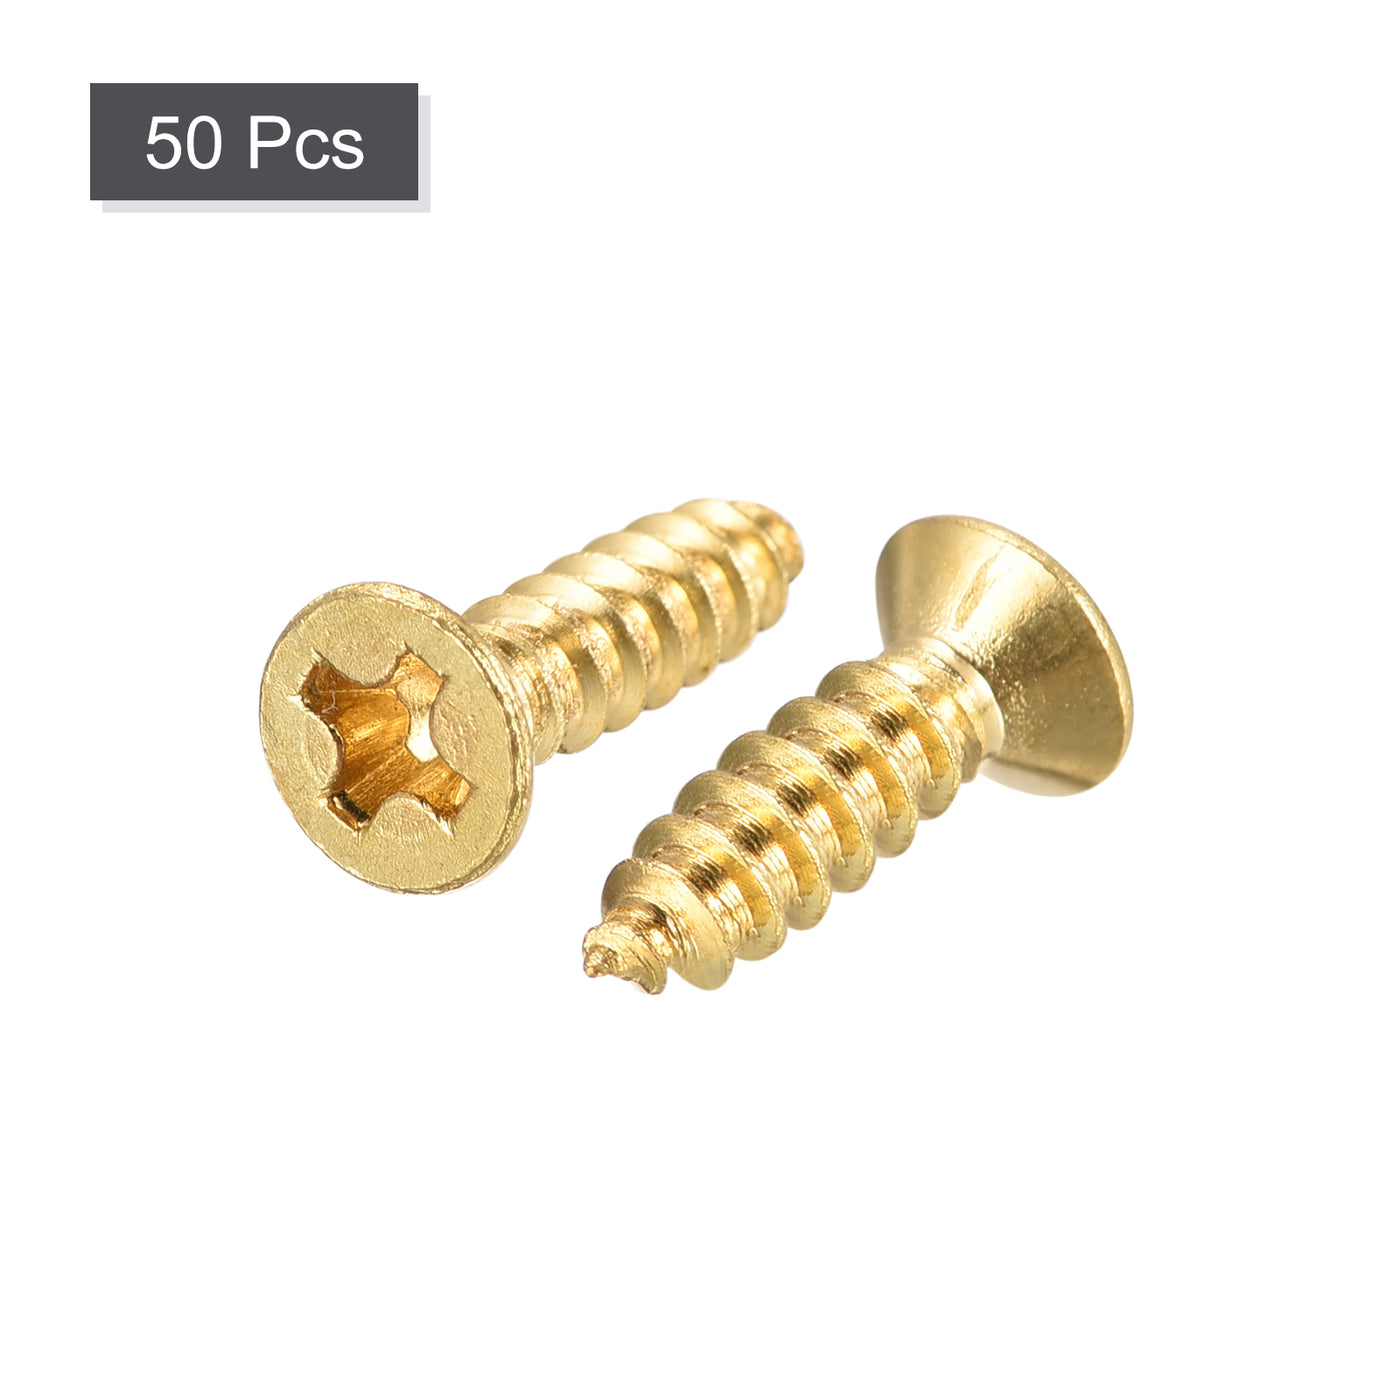 uxcell Uxcell Brass Wood Screws, M3x12mm Phillips Flat Head Self Tapping Connector for Door, Cabinet, Wooden Furniture 50Pcs